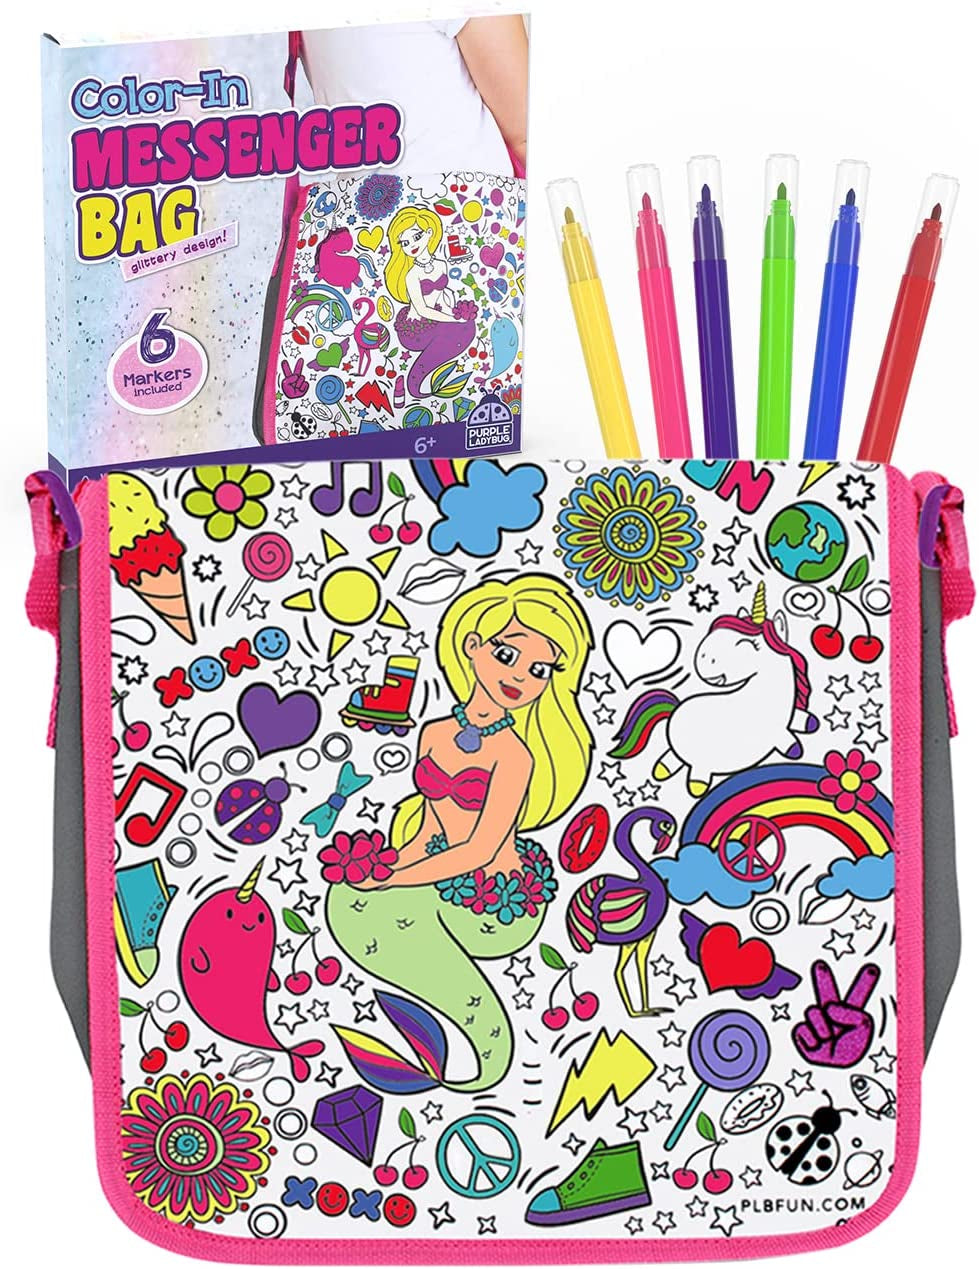 Decorate Your Own Messenger Bag for Girls! Color Your Own Bag for Kids with Vibrant Markers plus a Bonus Pencil Case! Fun DIY Coloring Arts and Crafts Set, Great for School & Travel, Unique Girl Gifts